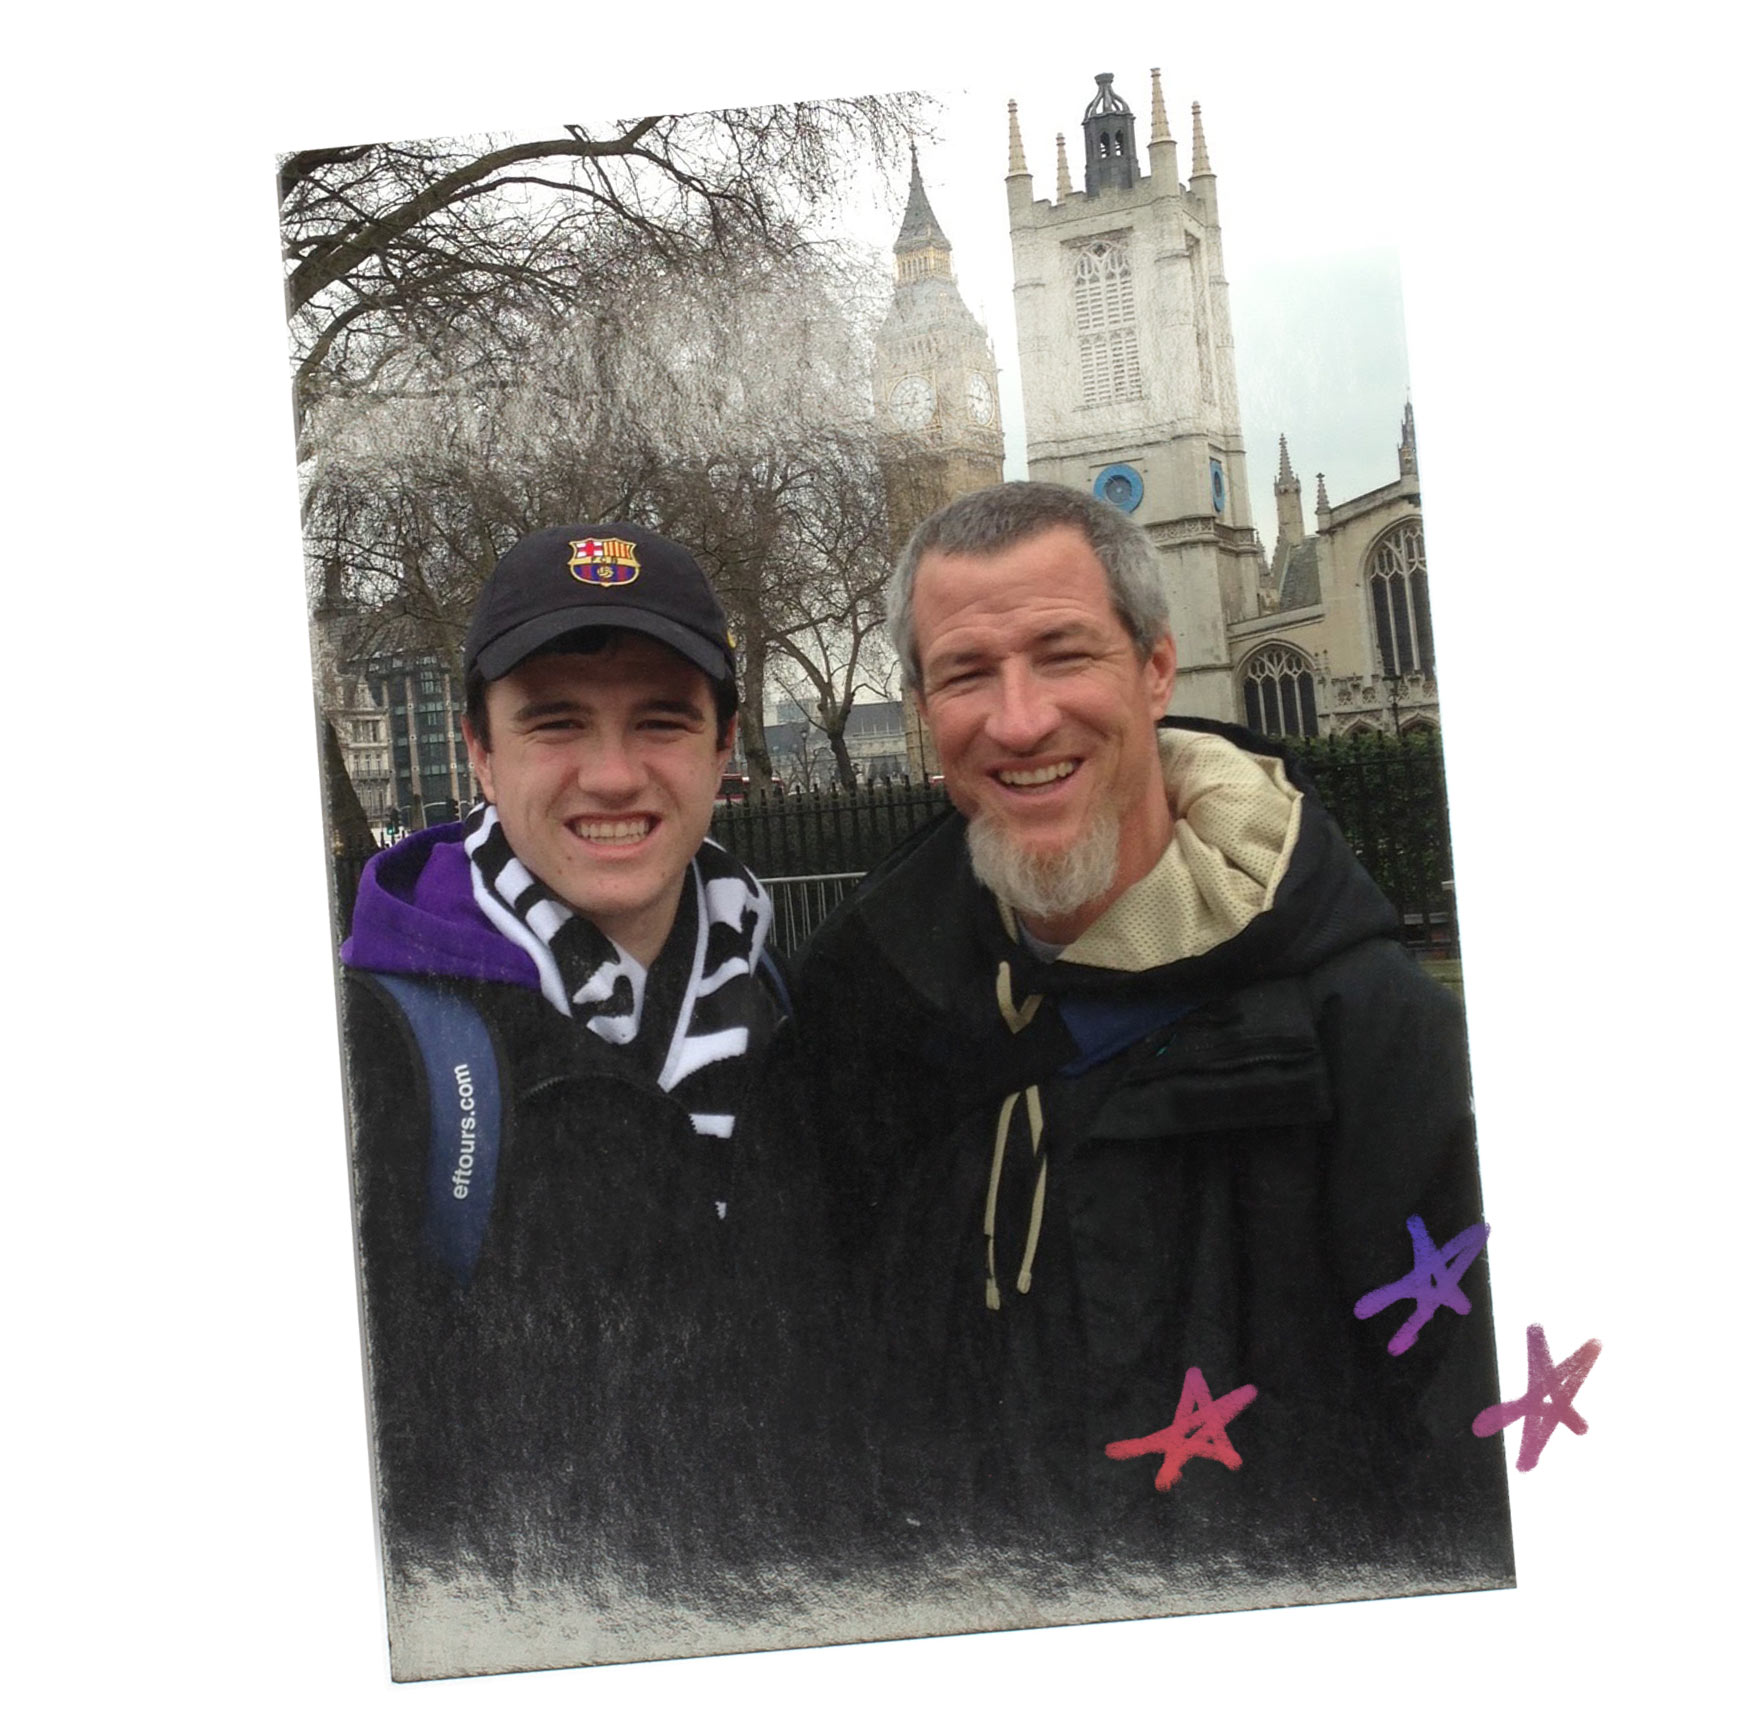 A high-school-aged Billy and Danny pose for a picture in London on an EF tour, Billy's first step toward appreciating cultures.